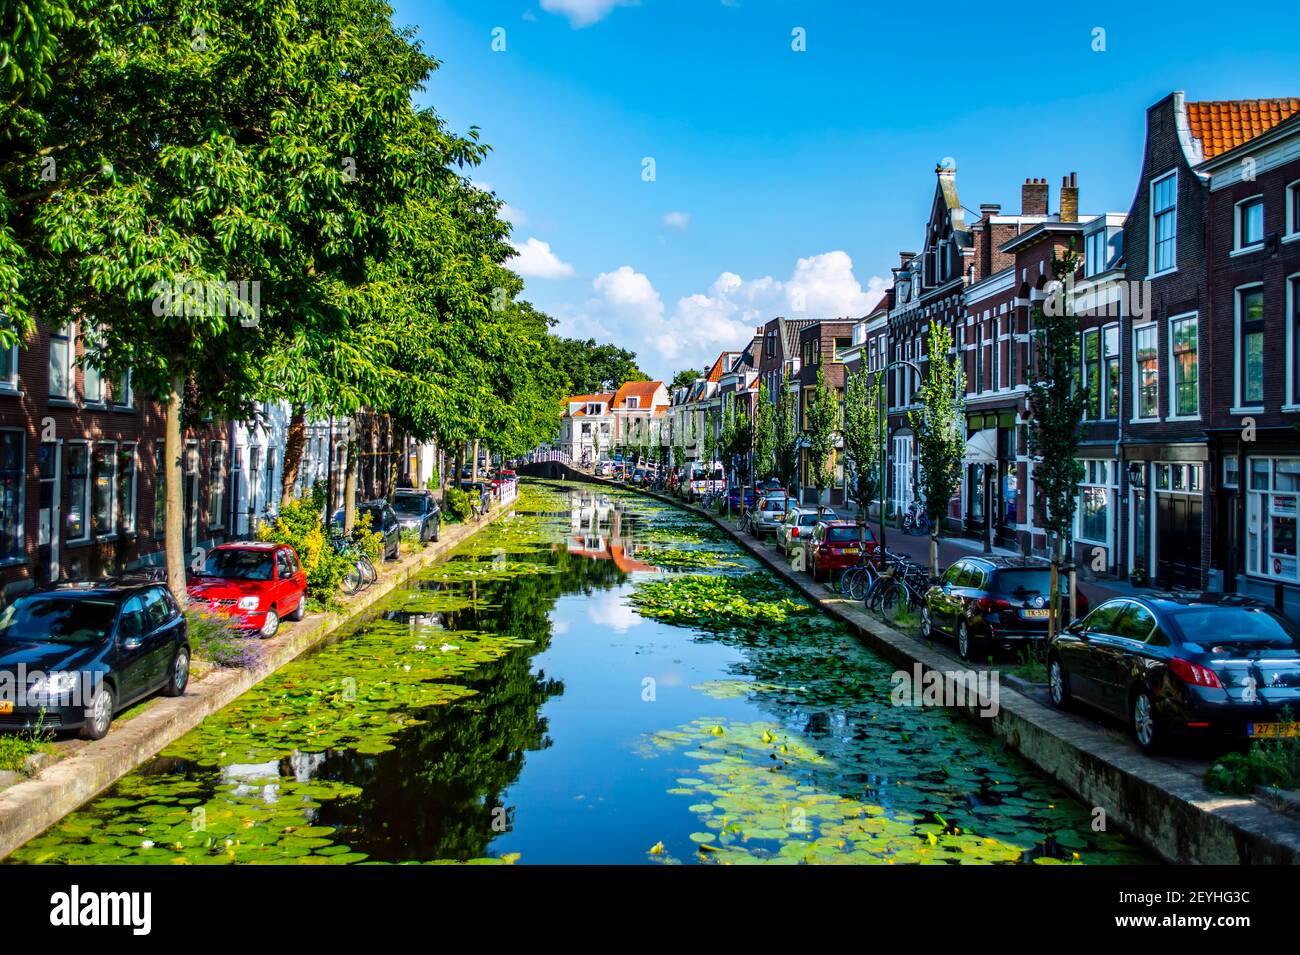 Delft, Netherlands - July 11, 2019: View of canals and brick houses of the town of Delft in the Netherlands Stock Photo